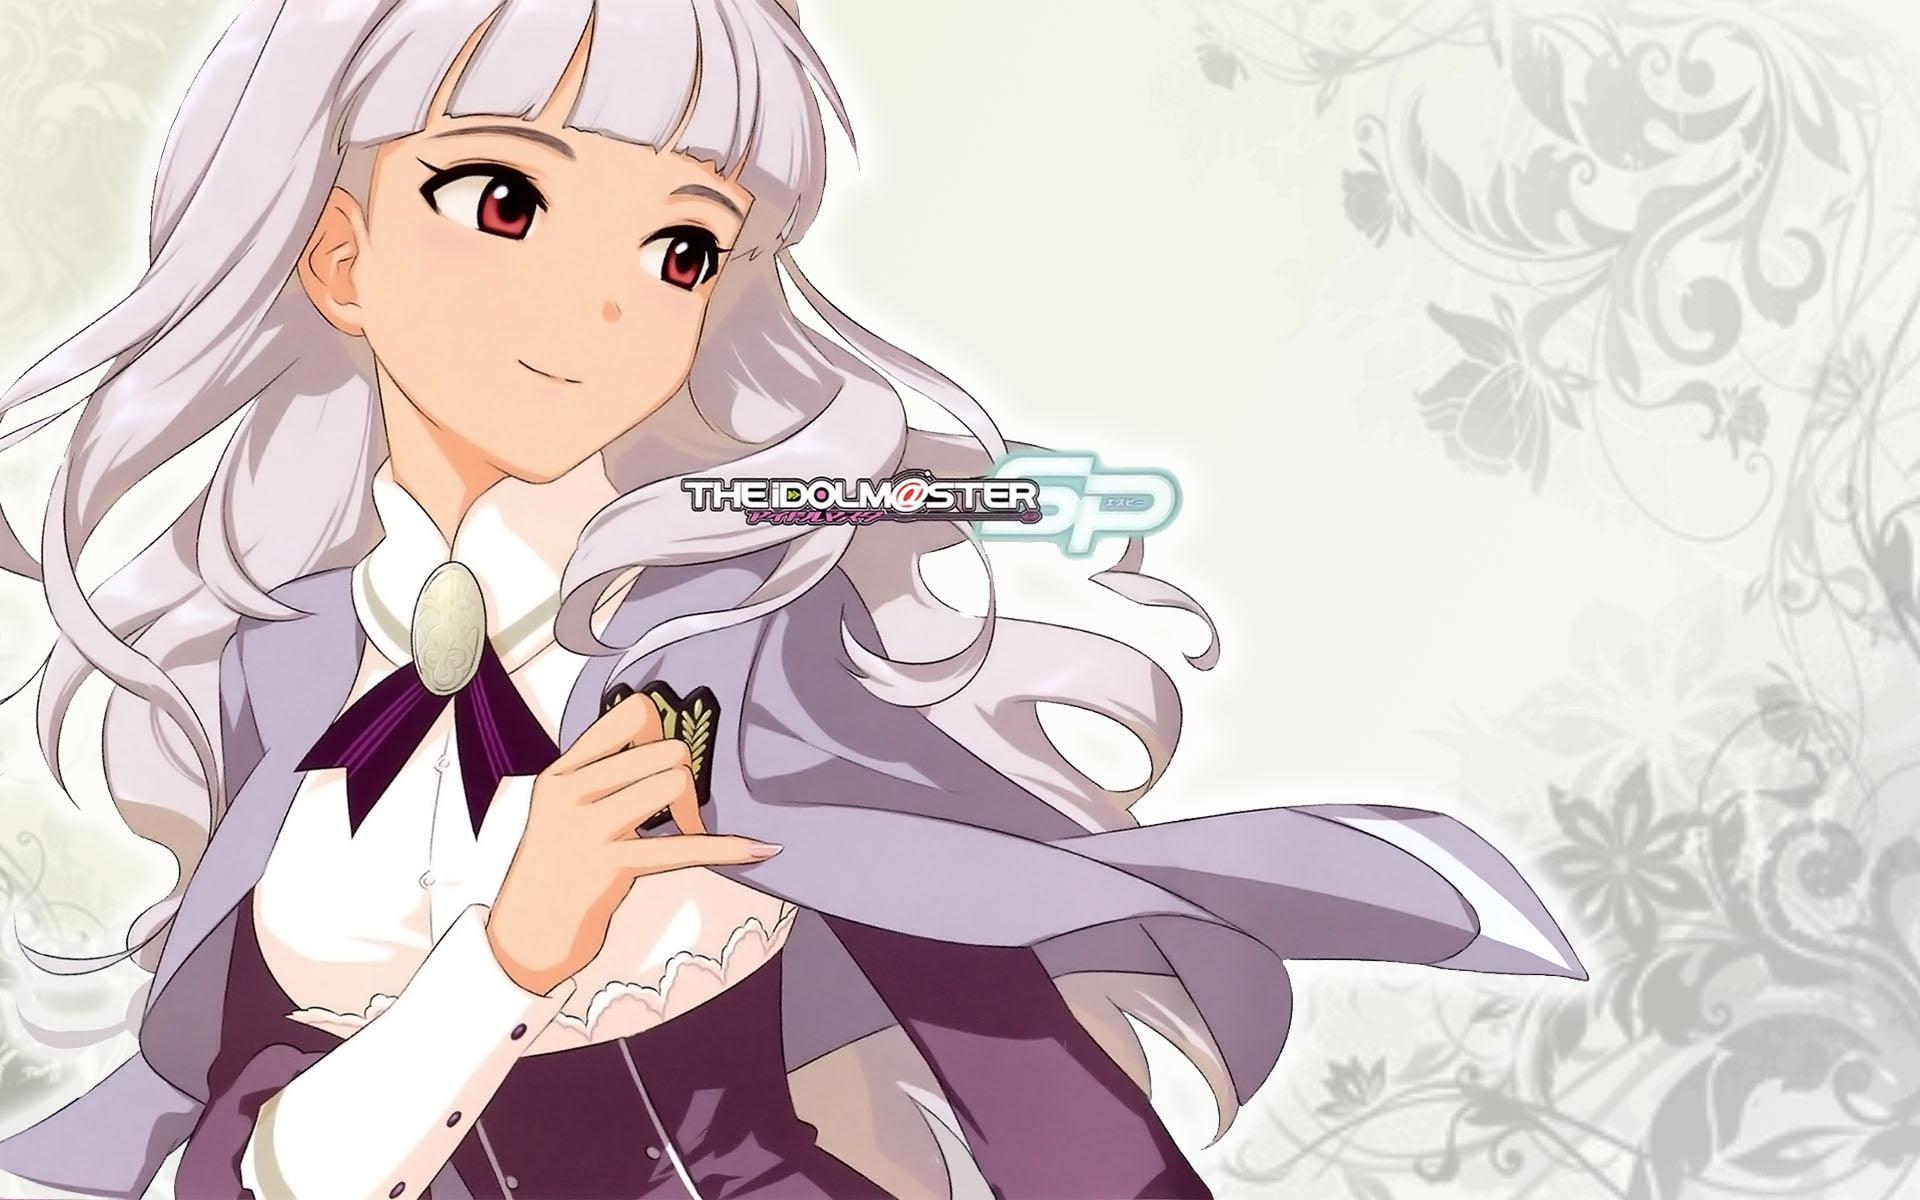 Gray haired anime girl with white and gray clothes graphic